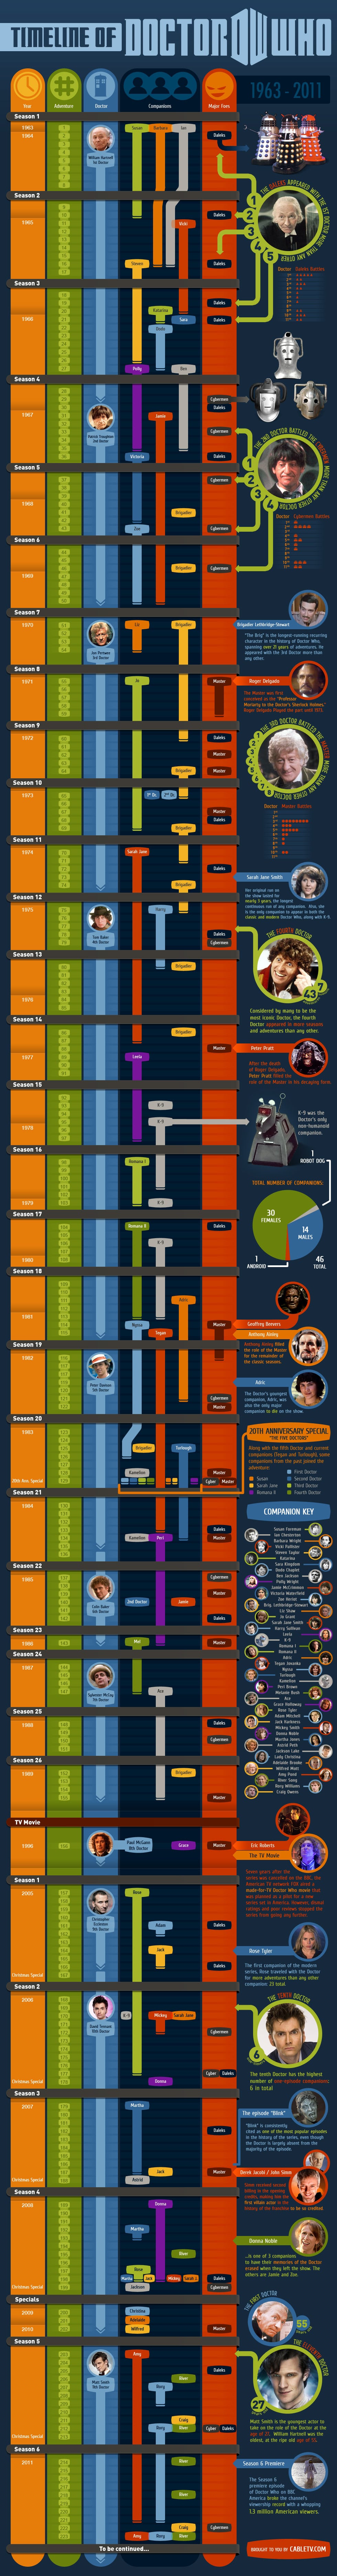 Doctor Who Complete Timeline Infographic